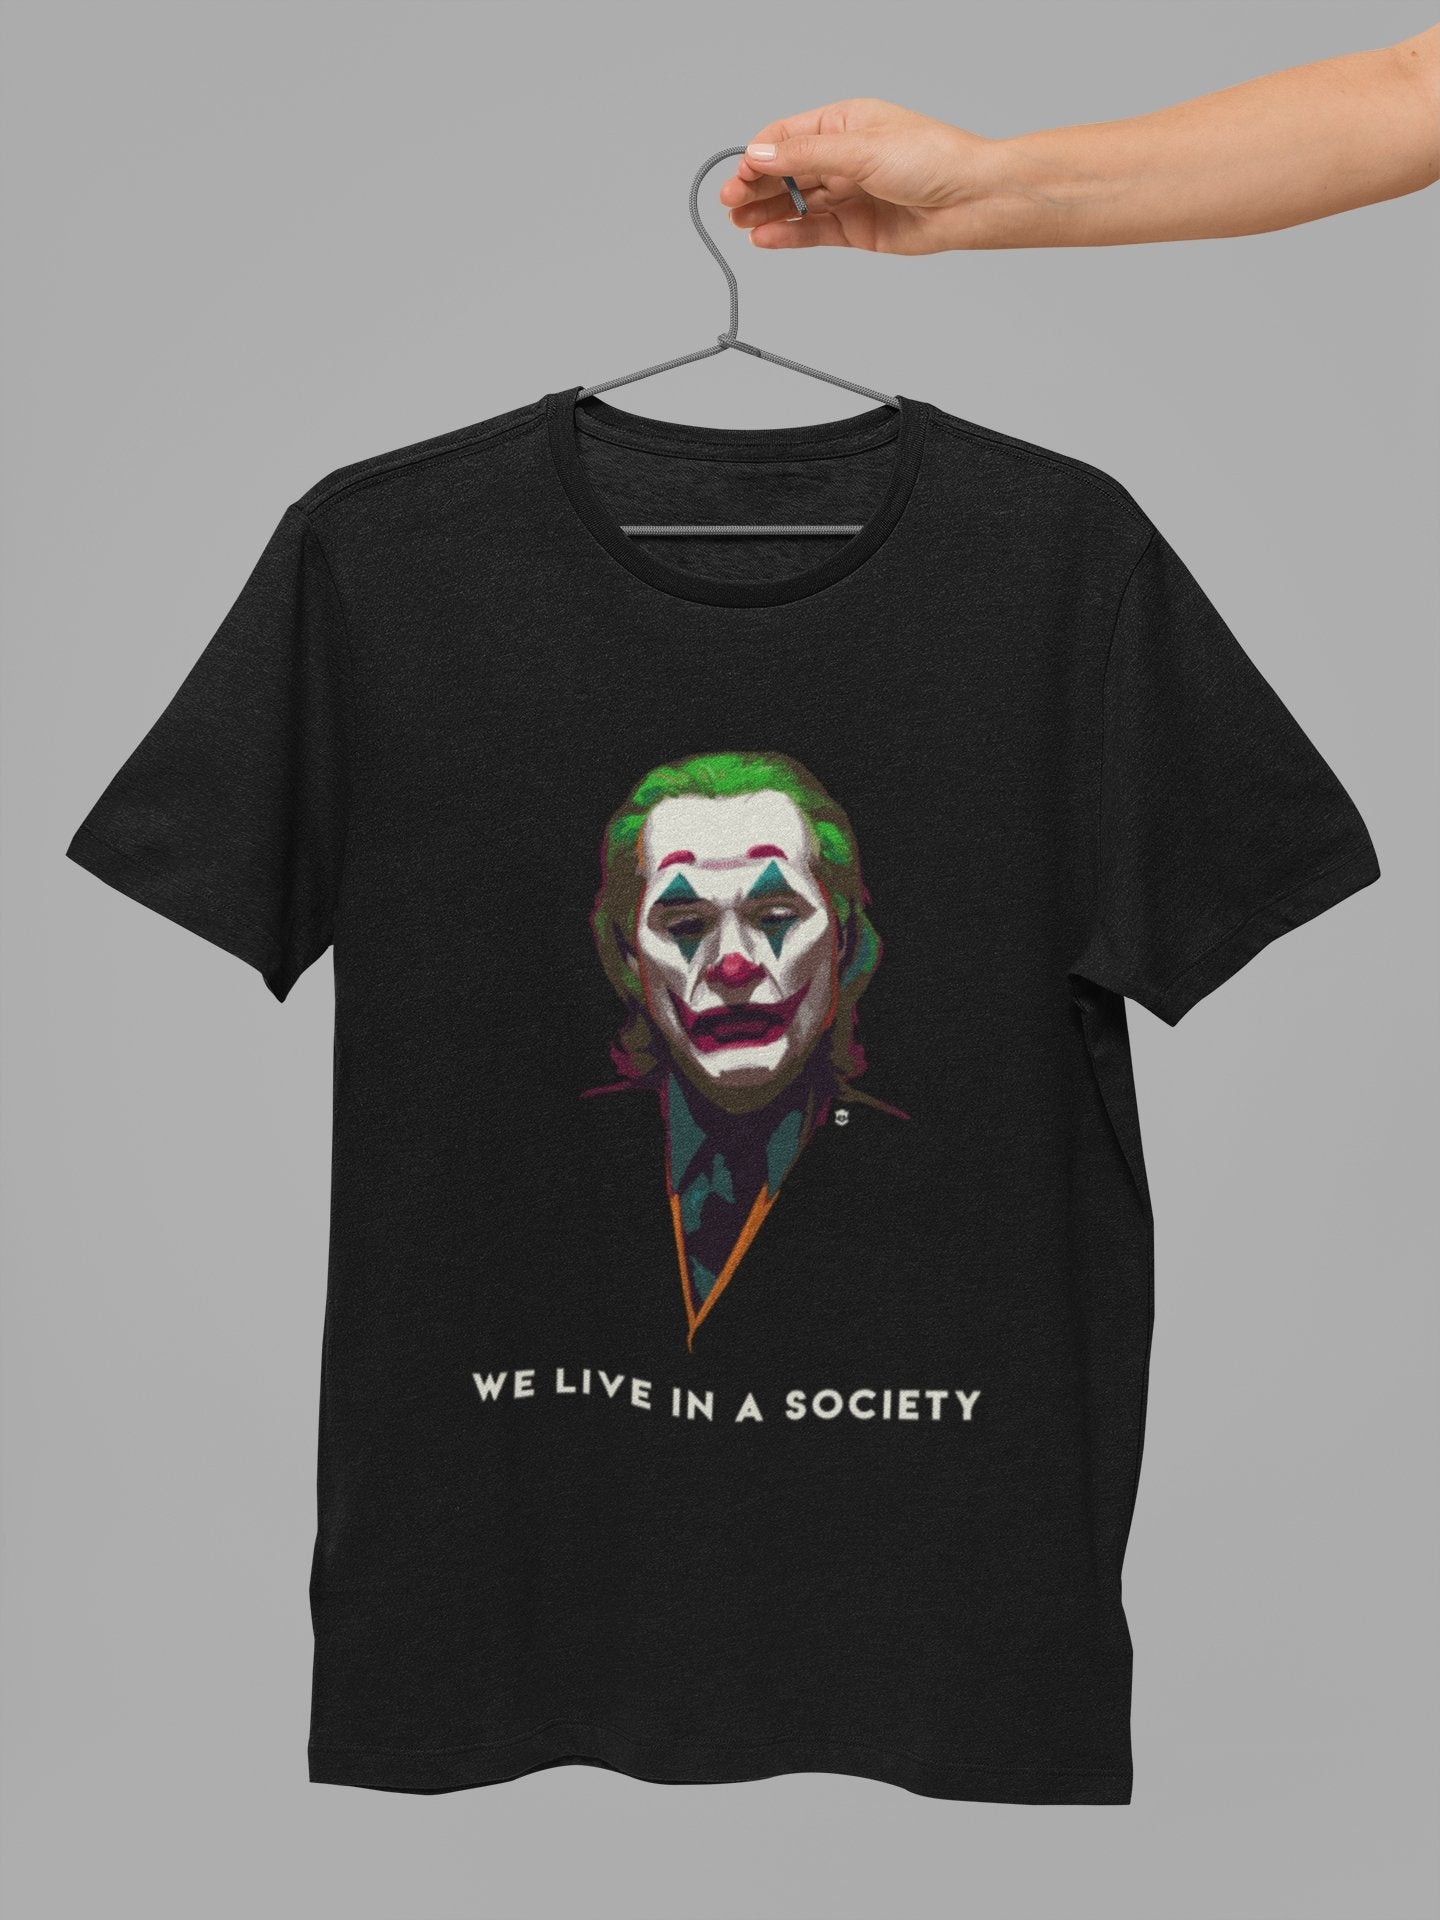 We Live In A Society Quote Joker T shirt - Insane Tees